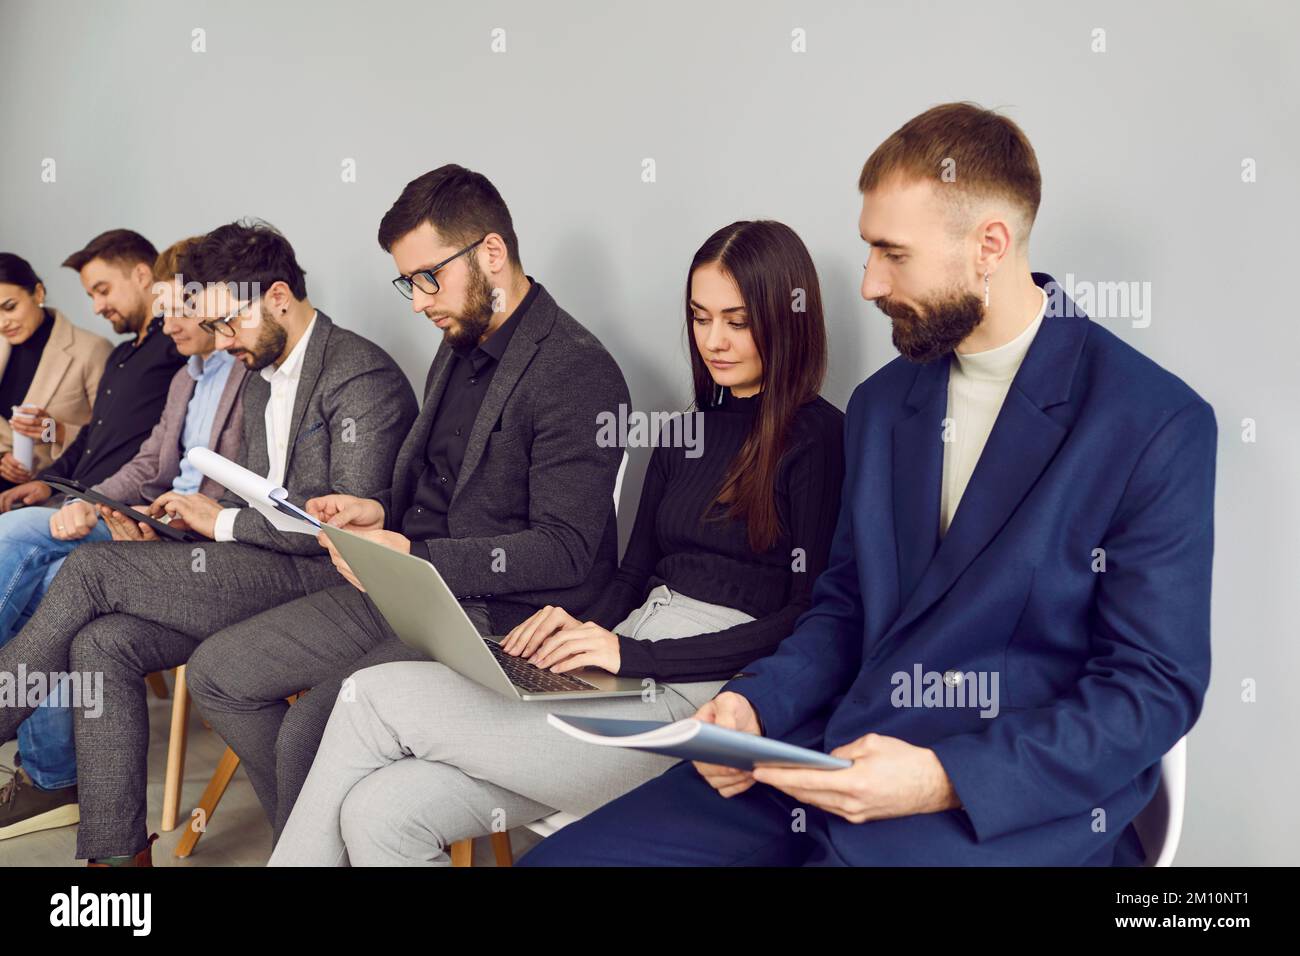 Group of business people sitting in the office, working on their projects and using laptops Stock Photo